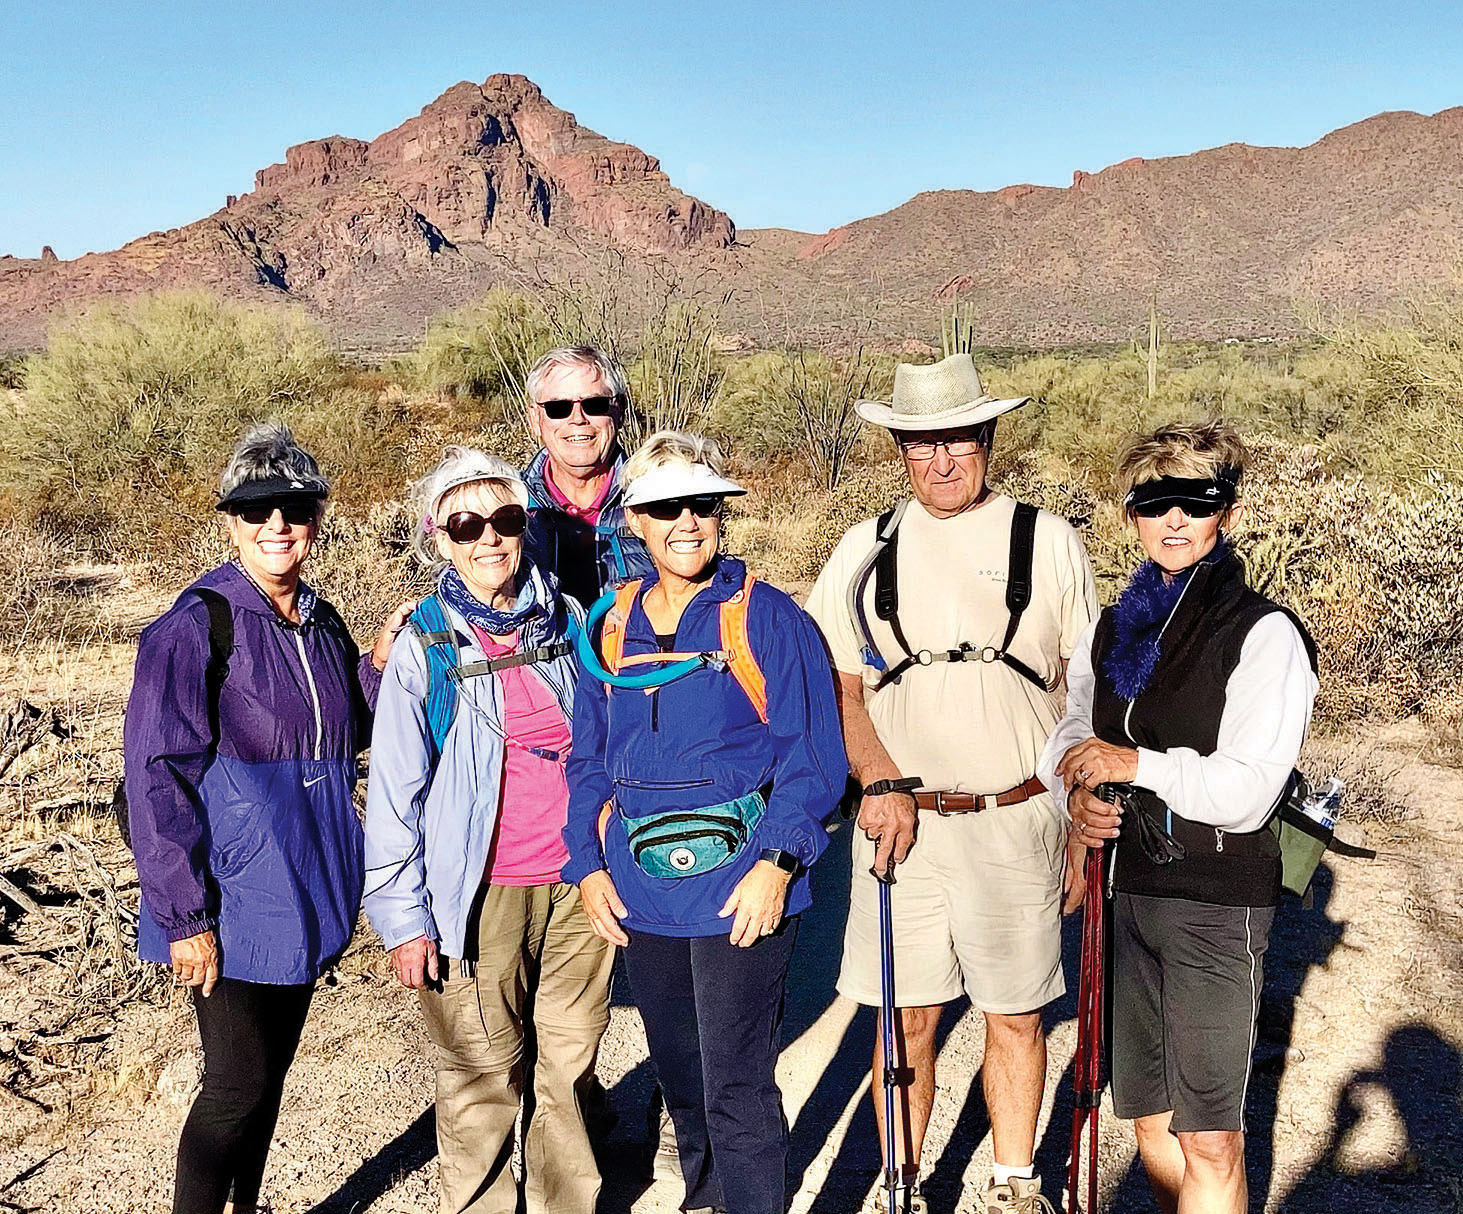 Pictured (left to right) are Carol Martin, Fran Stewart, Jim Anderson, Julie Anderson, Jack Phillips, and Jeanne Berte.